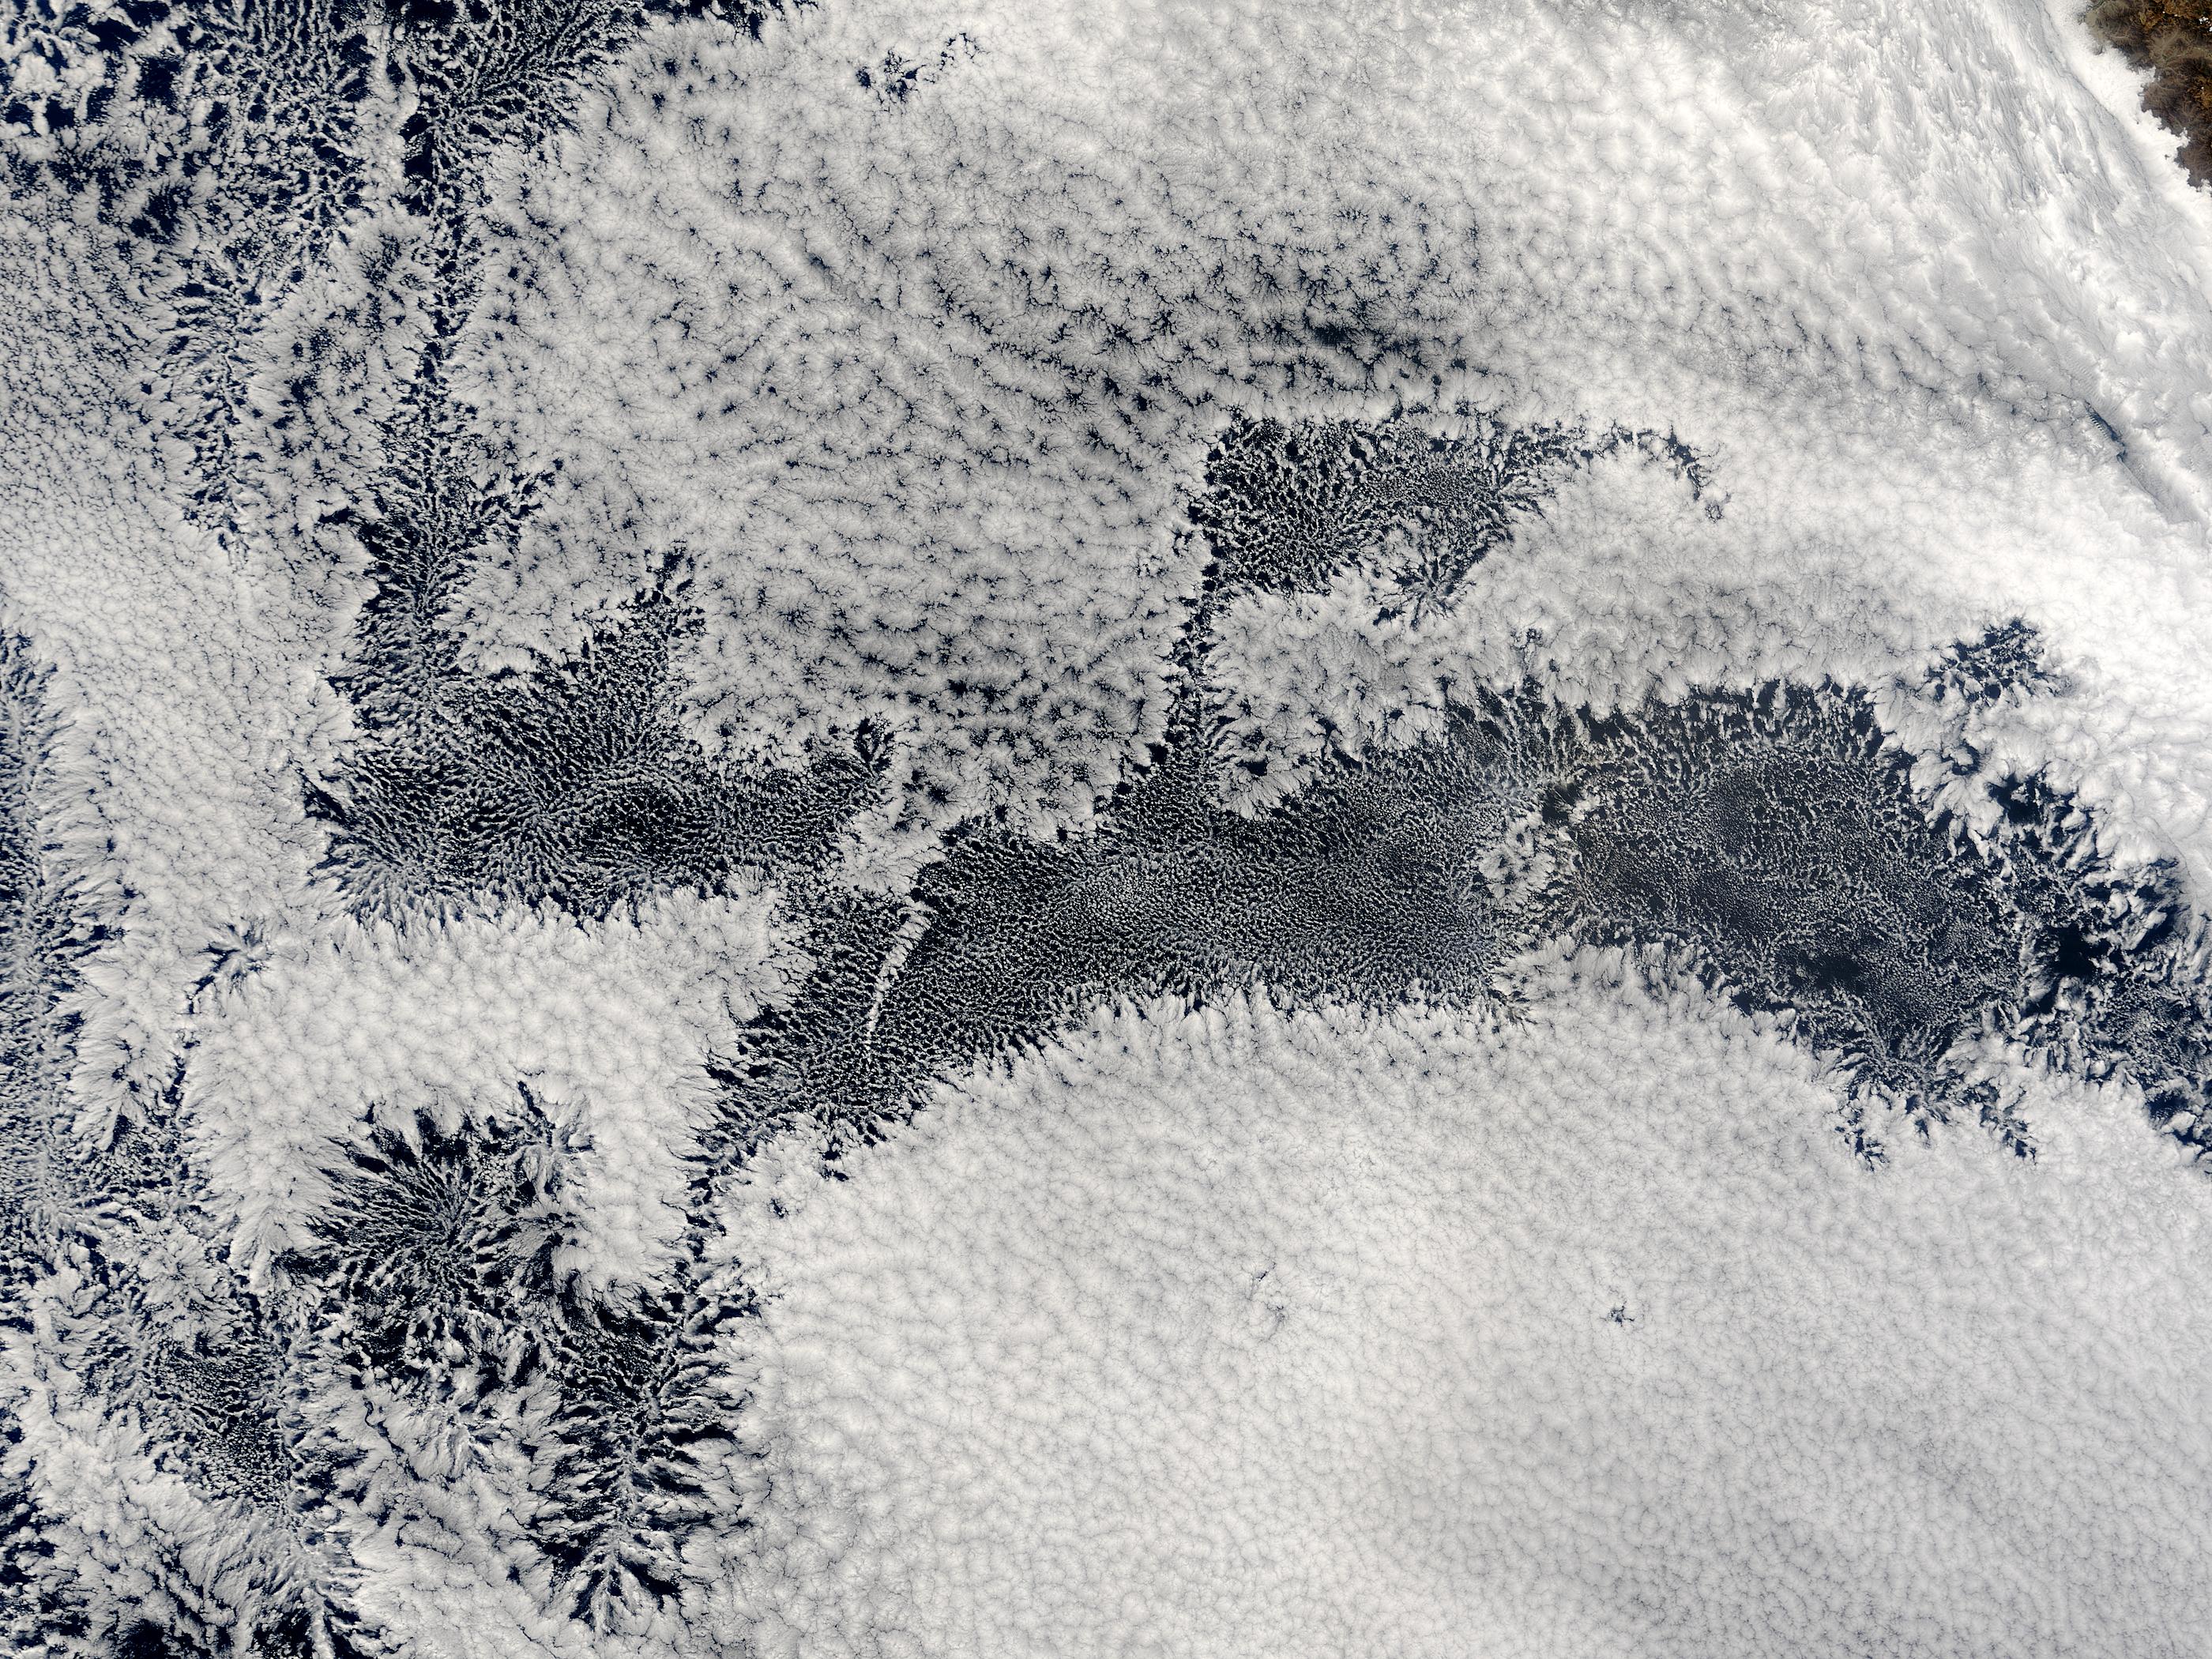 Open-cell and closed-cell clouds off Peru, Pacific Ocean - related image preview